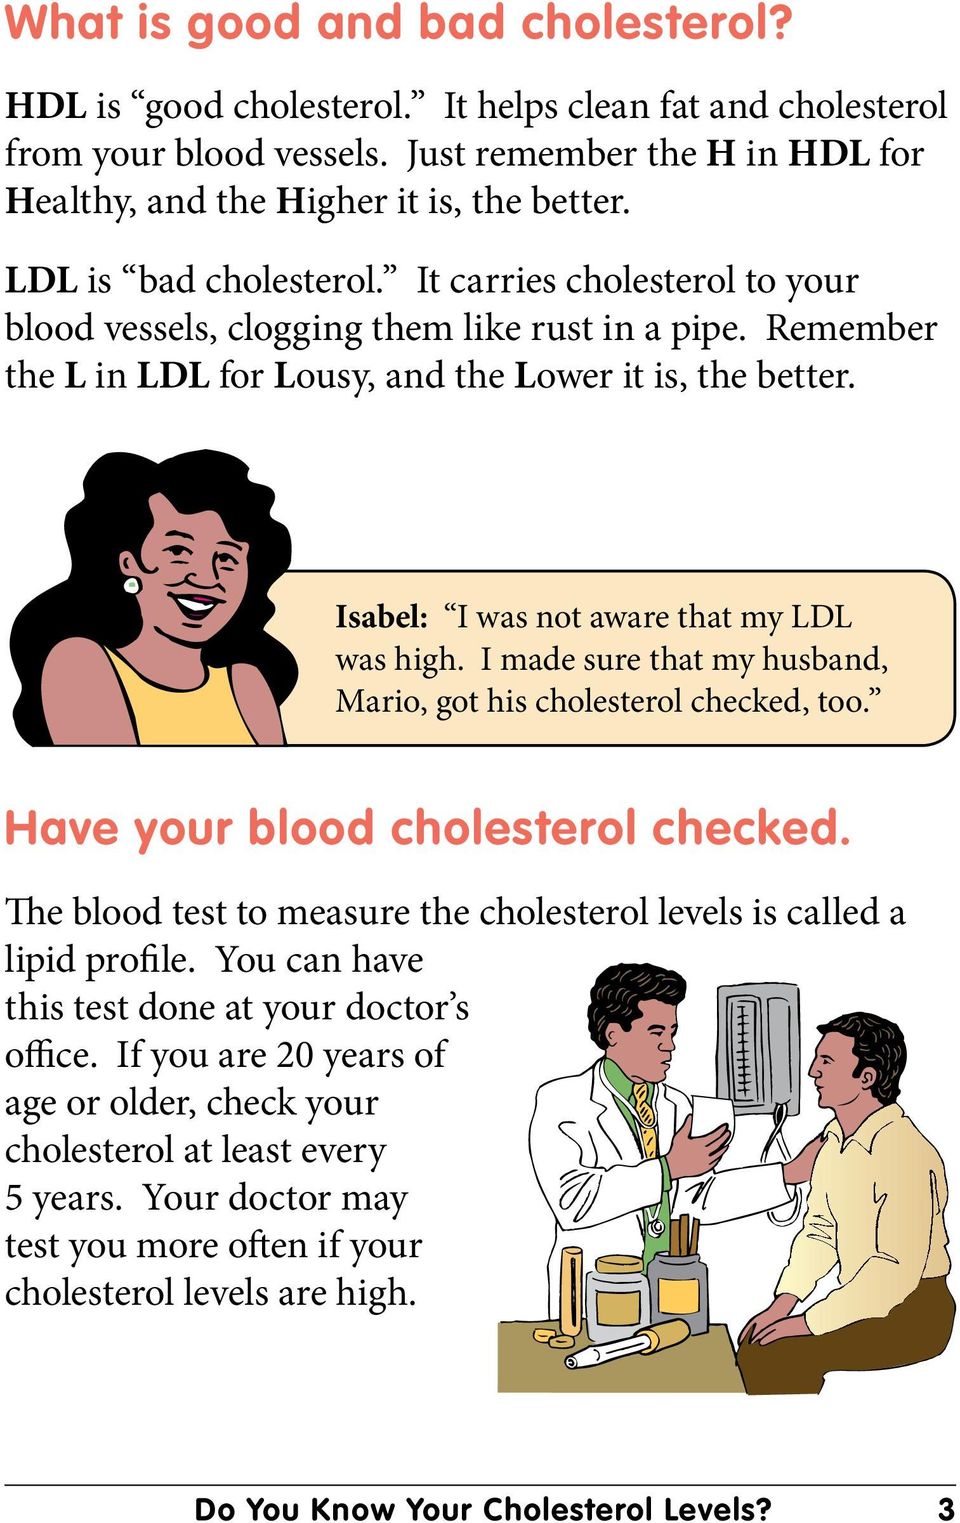 Isabel: I was not aware that my LDL was high. I made sure that my husband, Mario, got his cholesterol checked, too. Have your blood cholesterol checked.